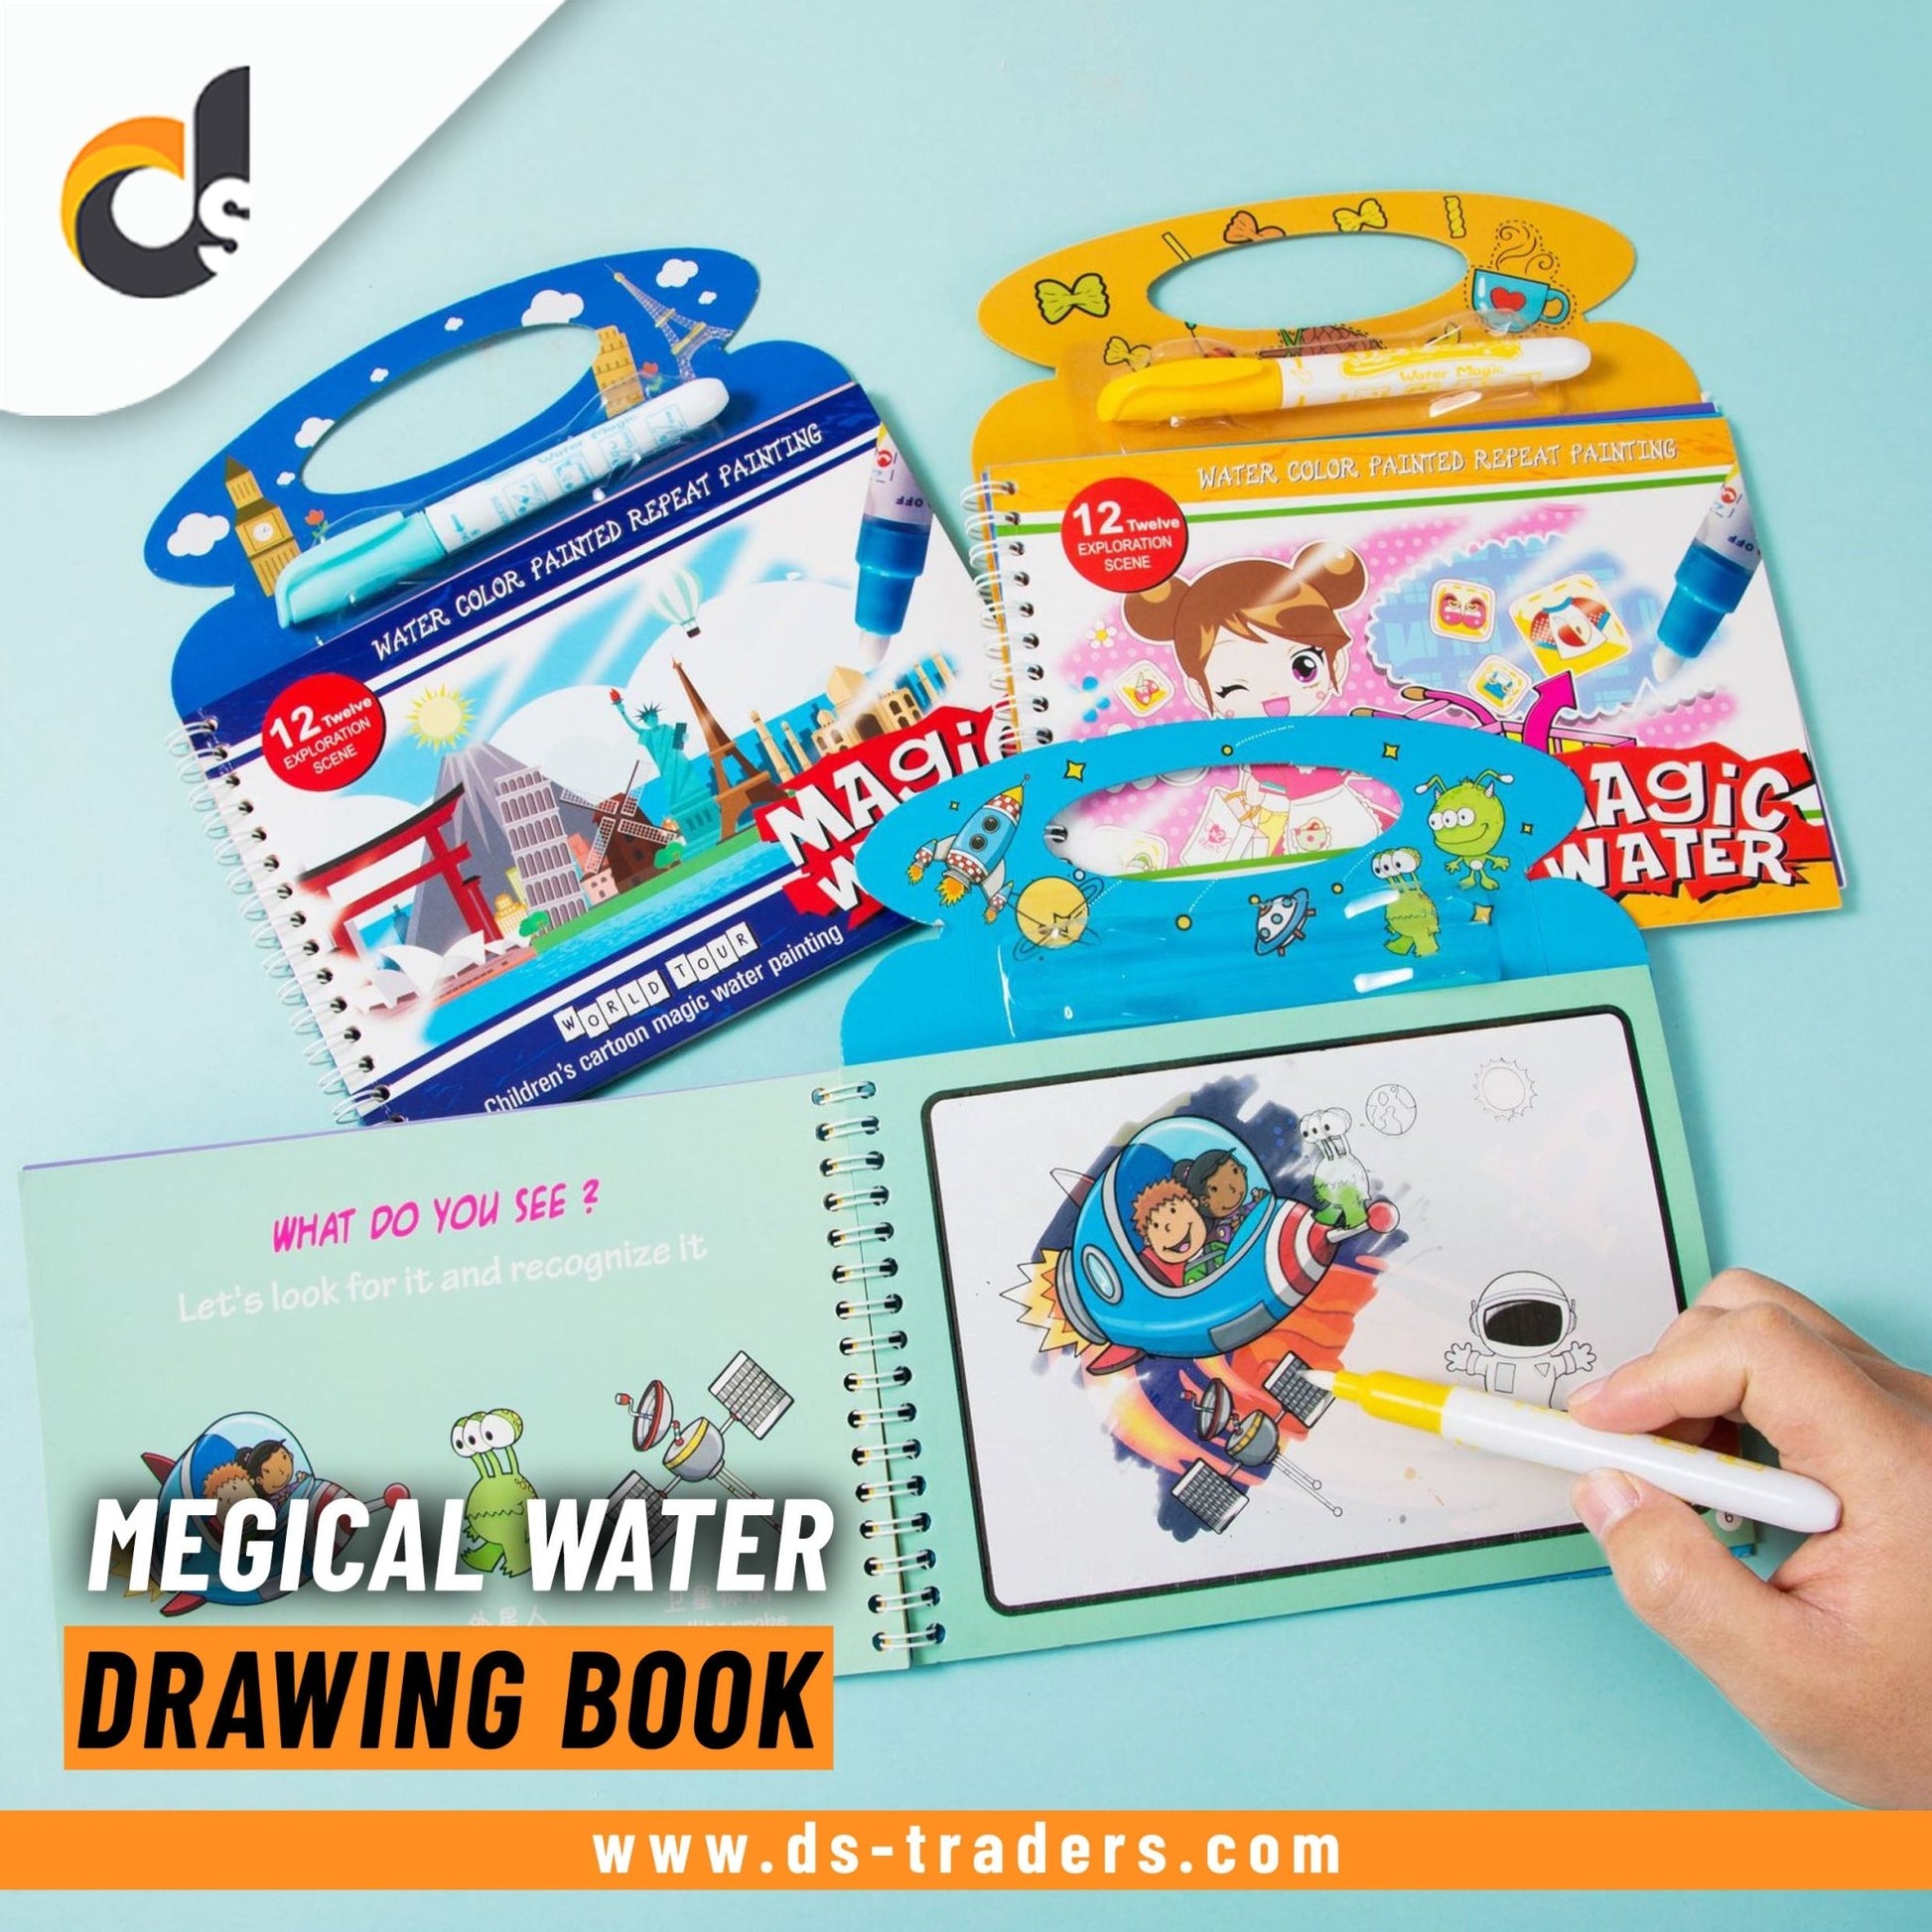 Megical Water Drawing Book - DS Traders